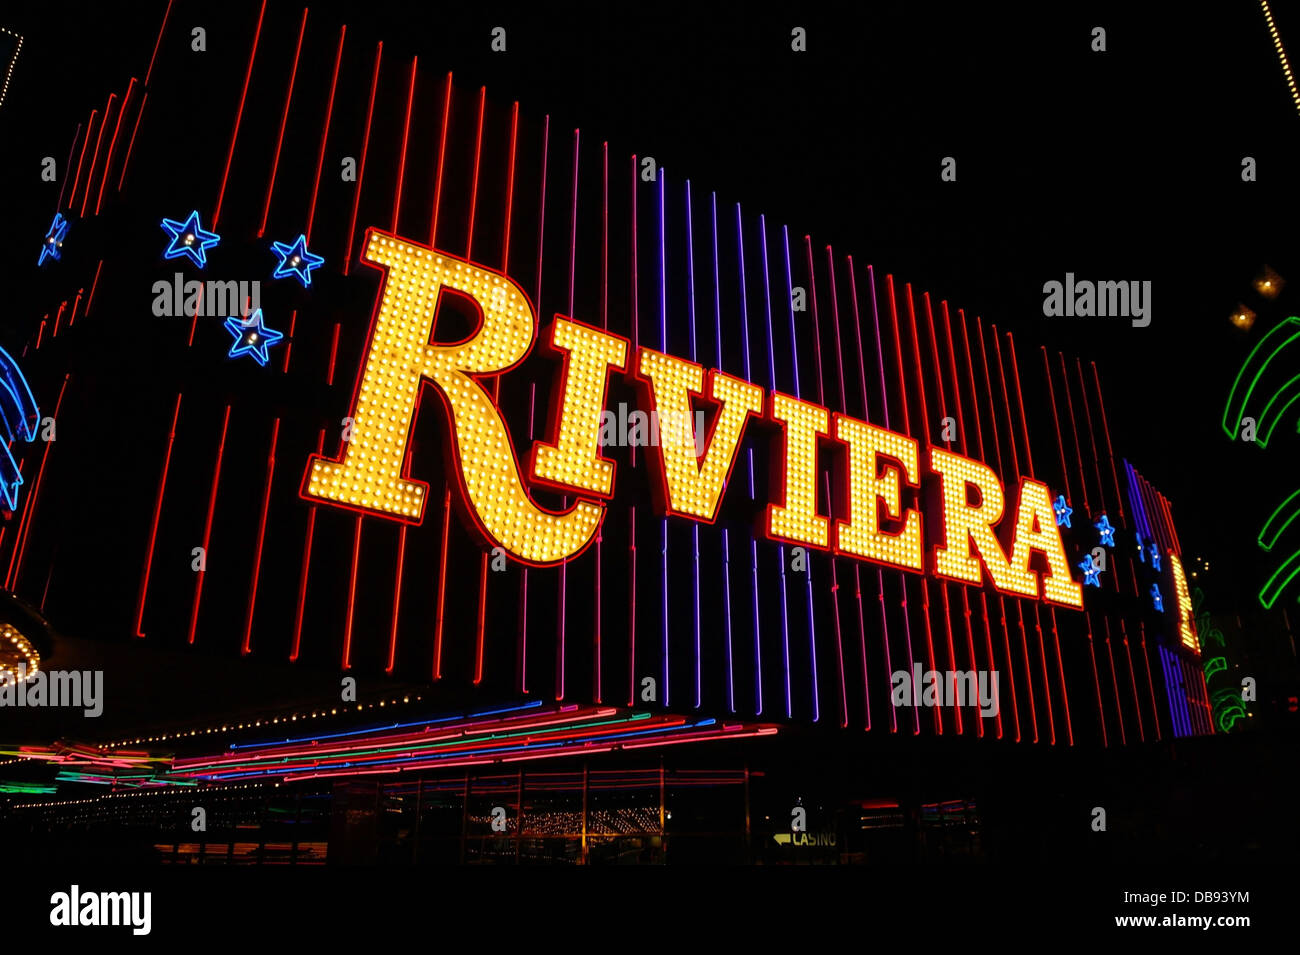 On This Date: April 20, 1955 The Riviera Hotel & Casino opened on the Las  Vegas Strip